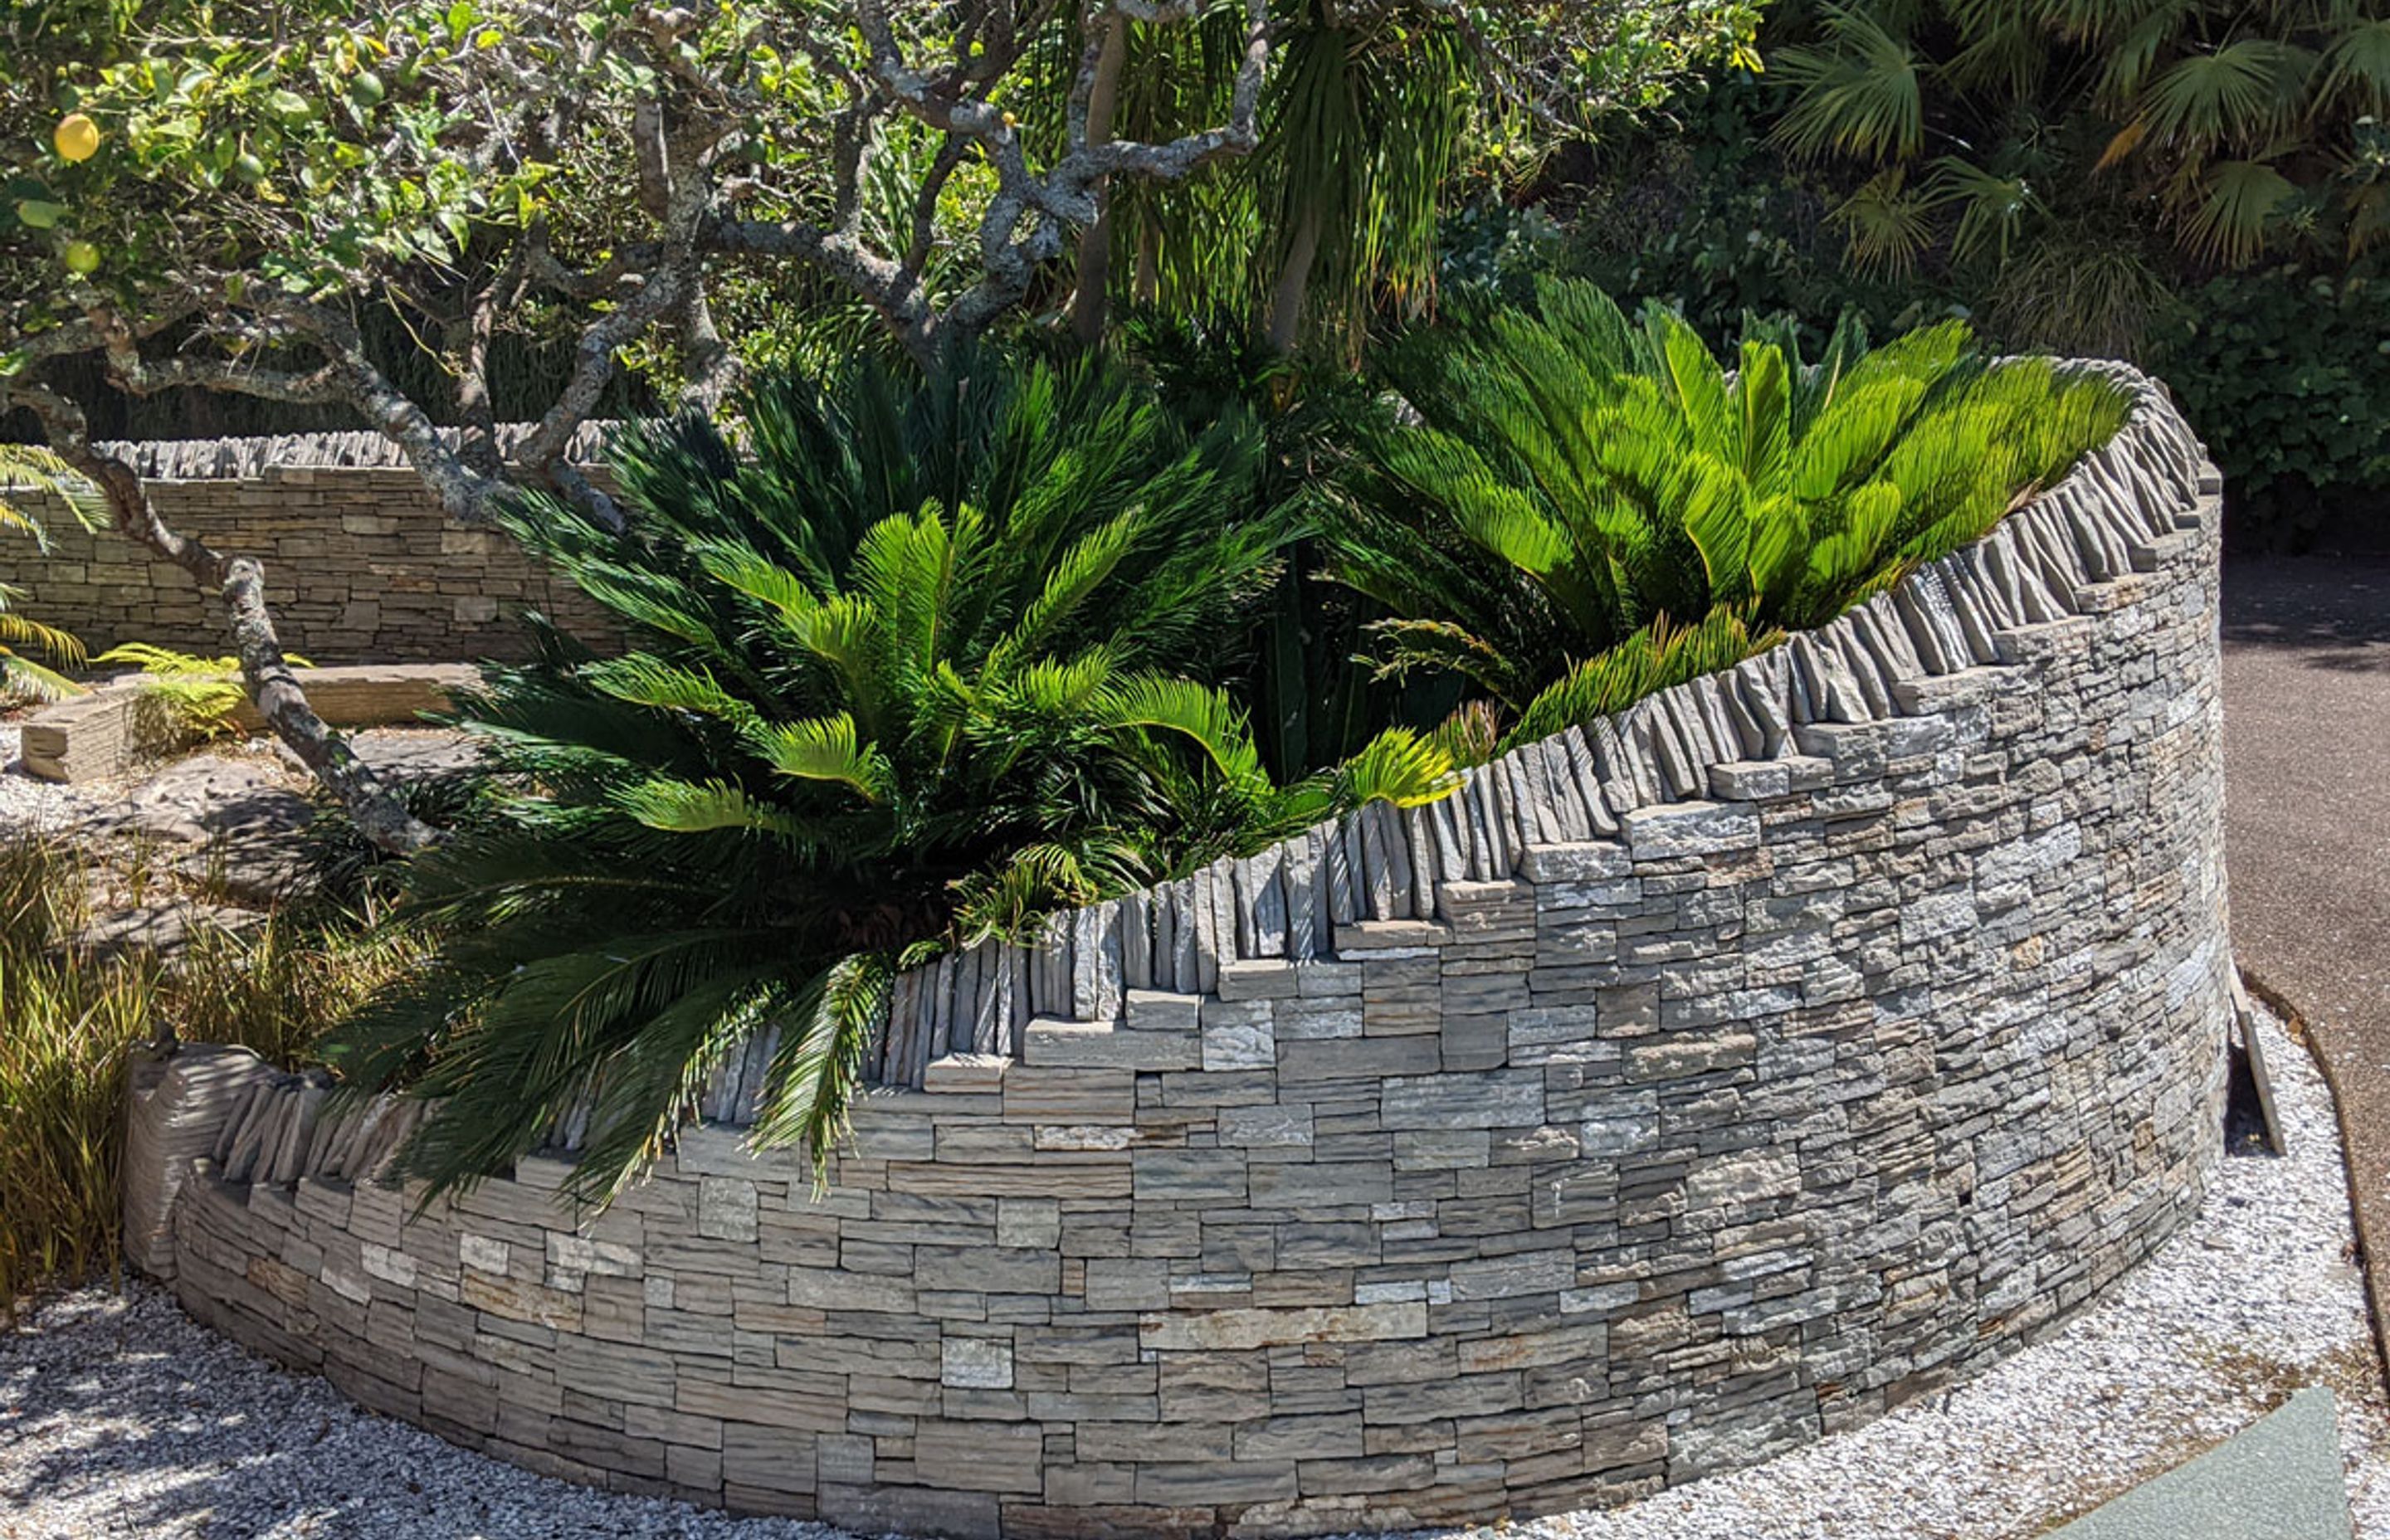 Main entrance feature stone wall